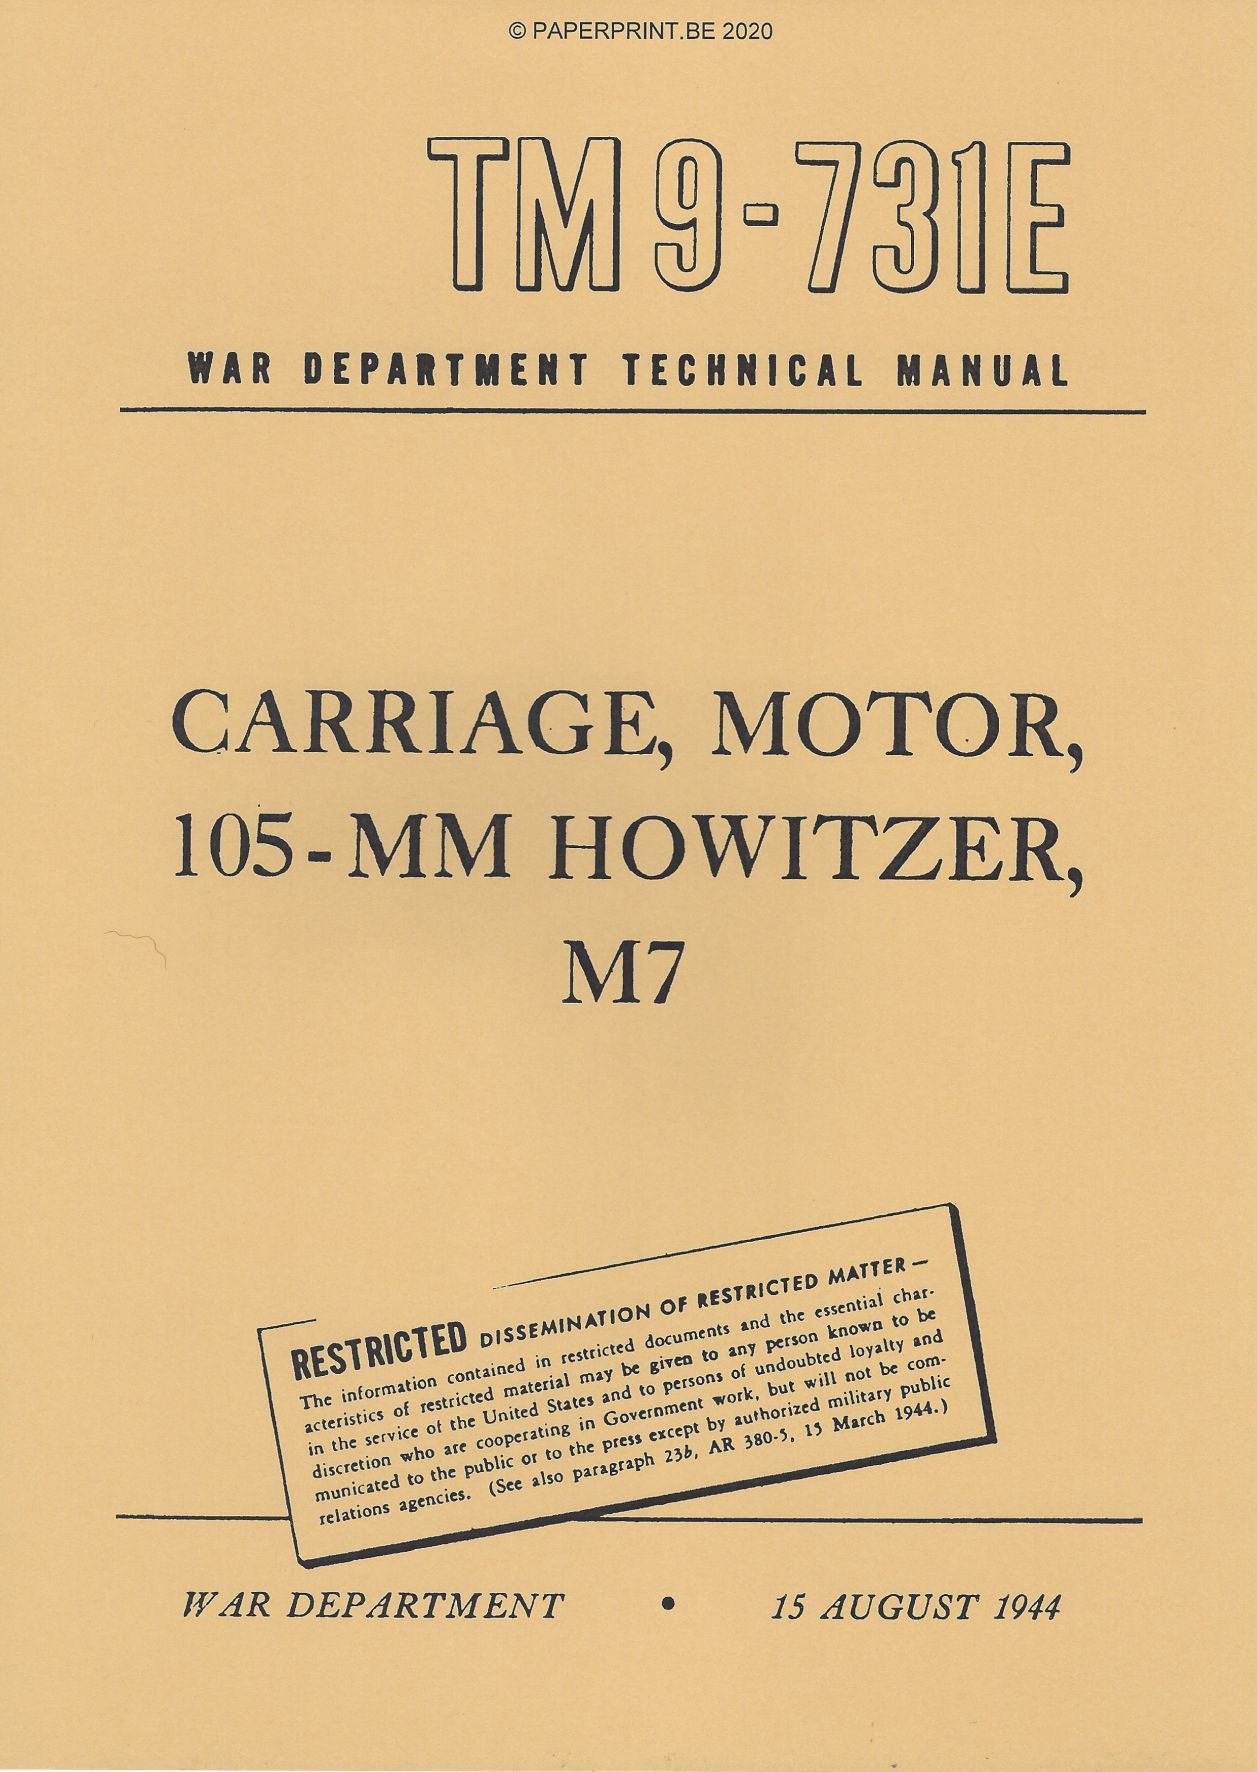 TM 9-731E US CARRIAGE, MOTOR, 105-MM HOWITZER, M7 (PRIEST)